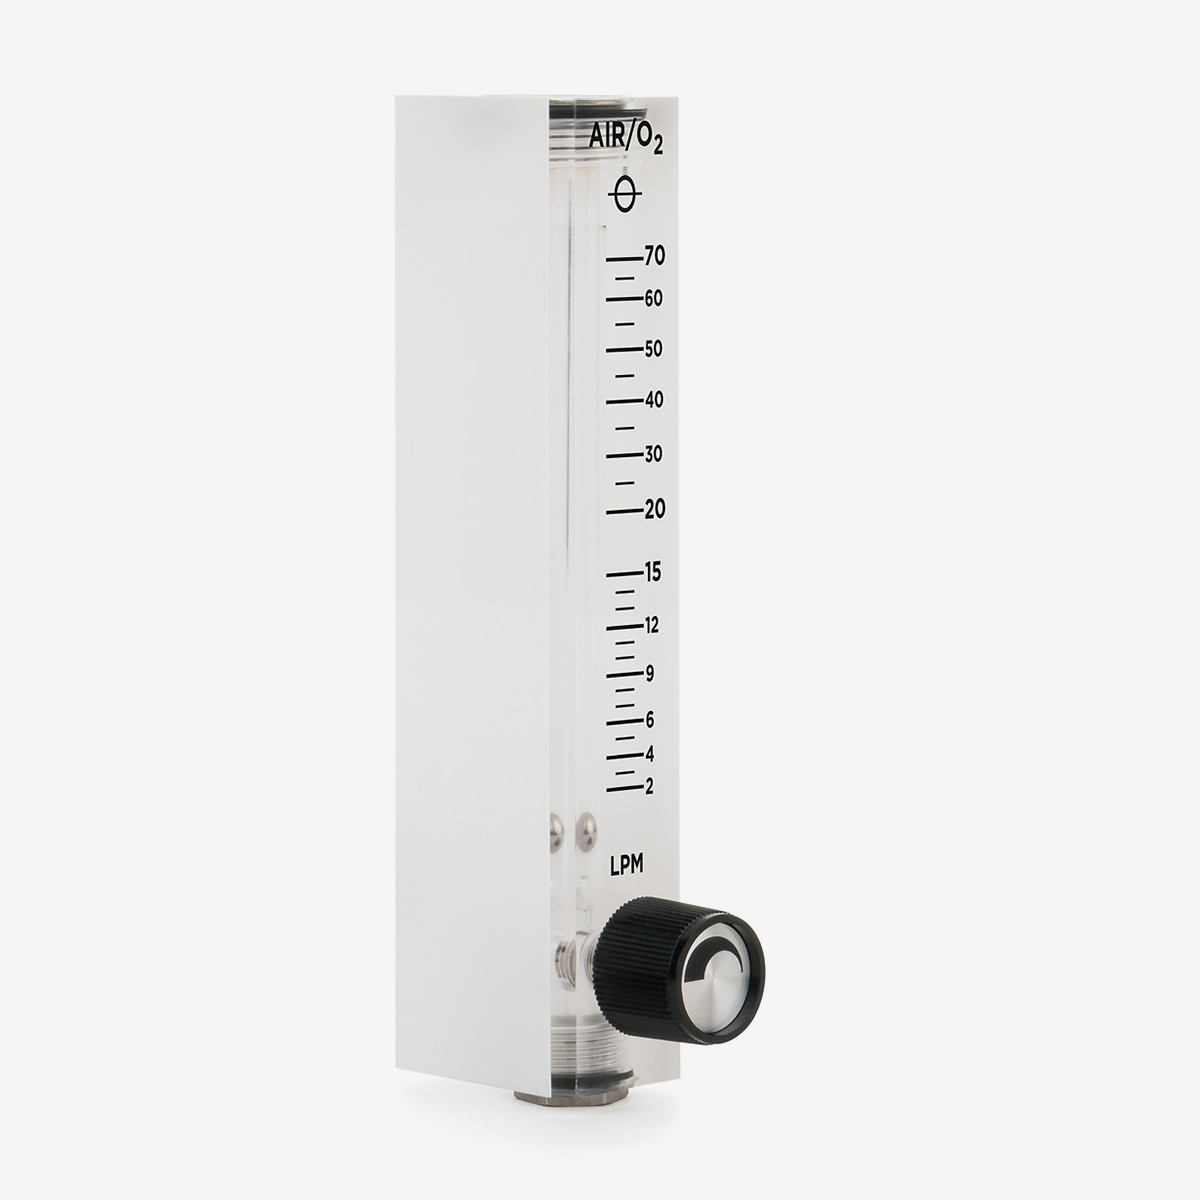 Side angled view of DFB dual scale 0-70 lpm acrylic flow meter with black knob